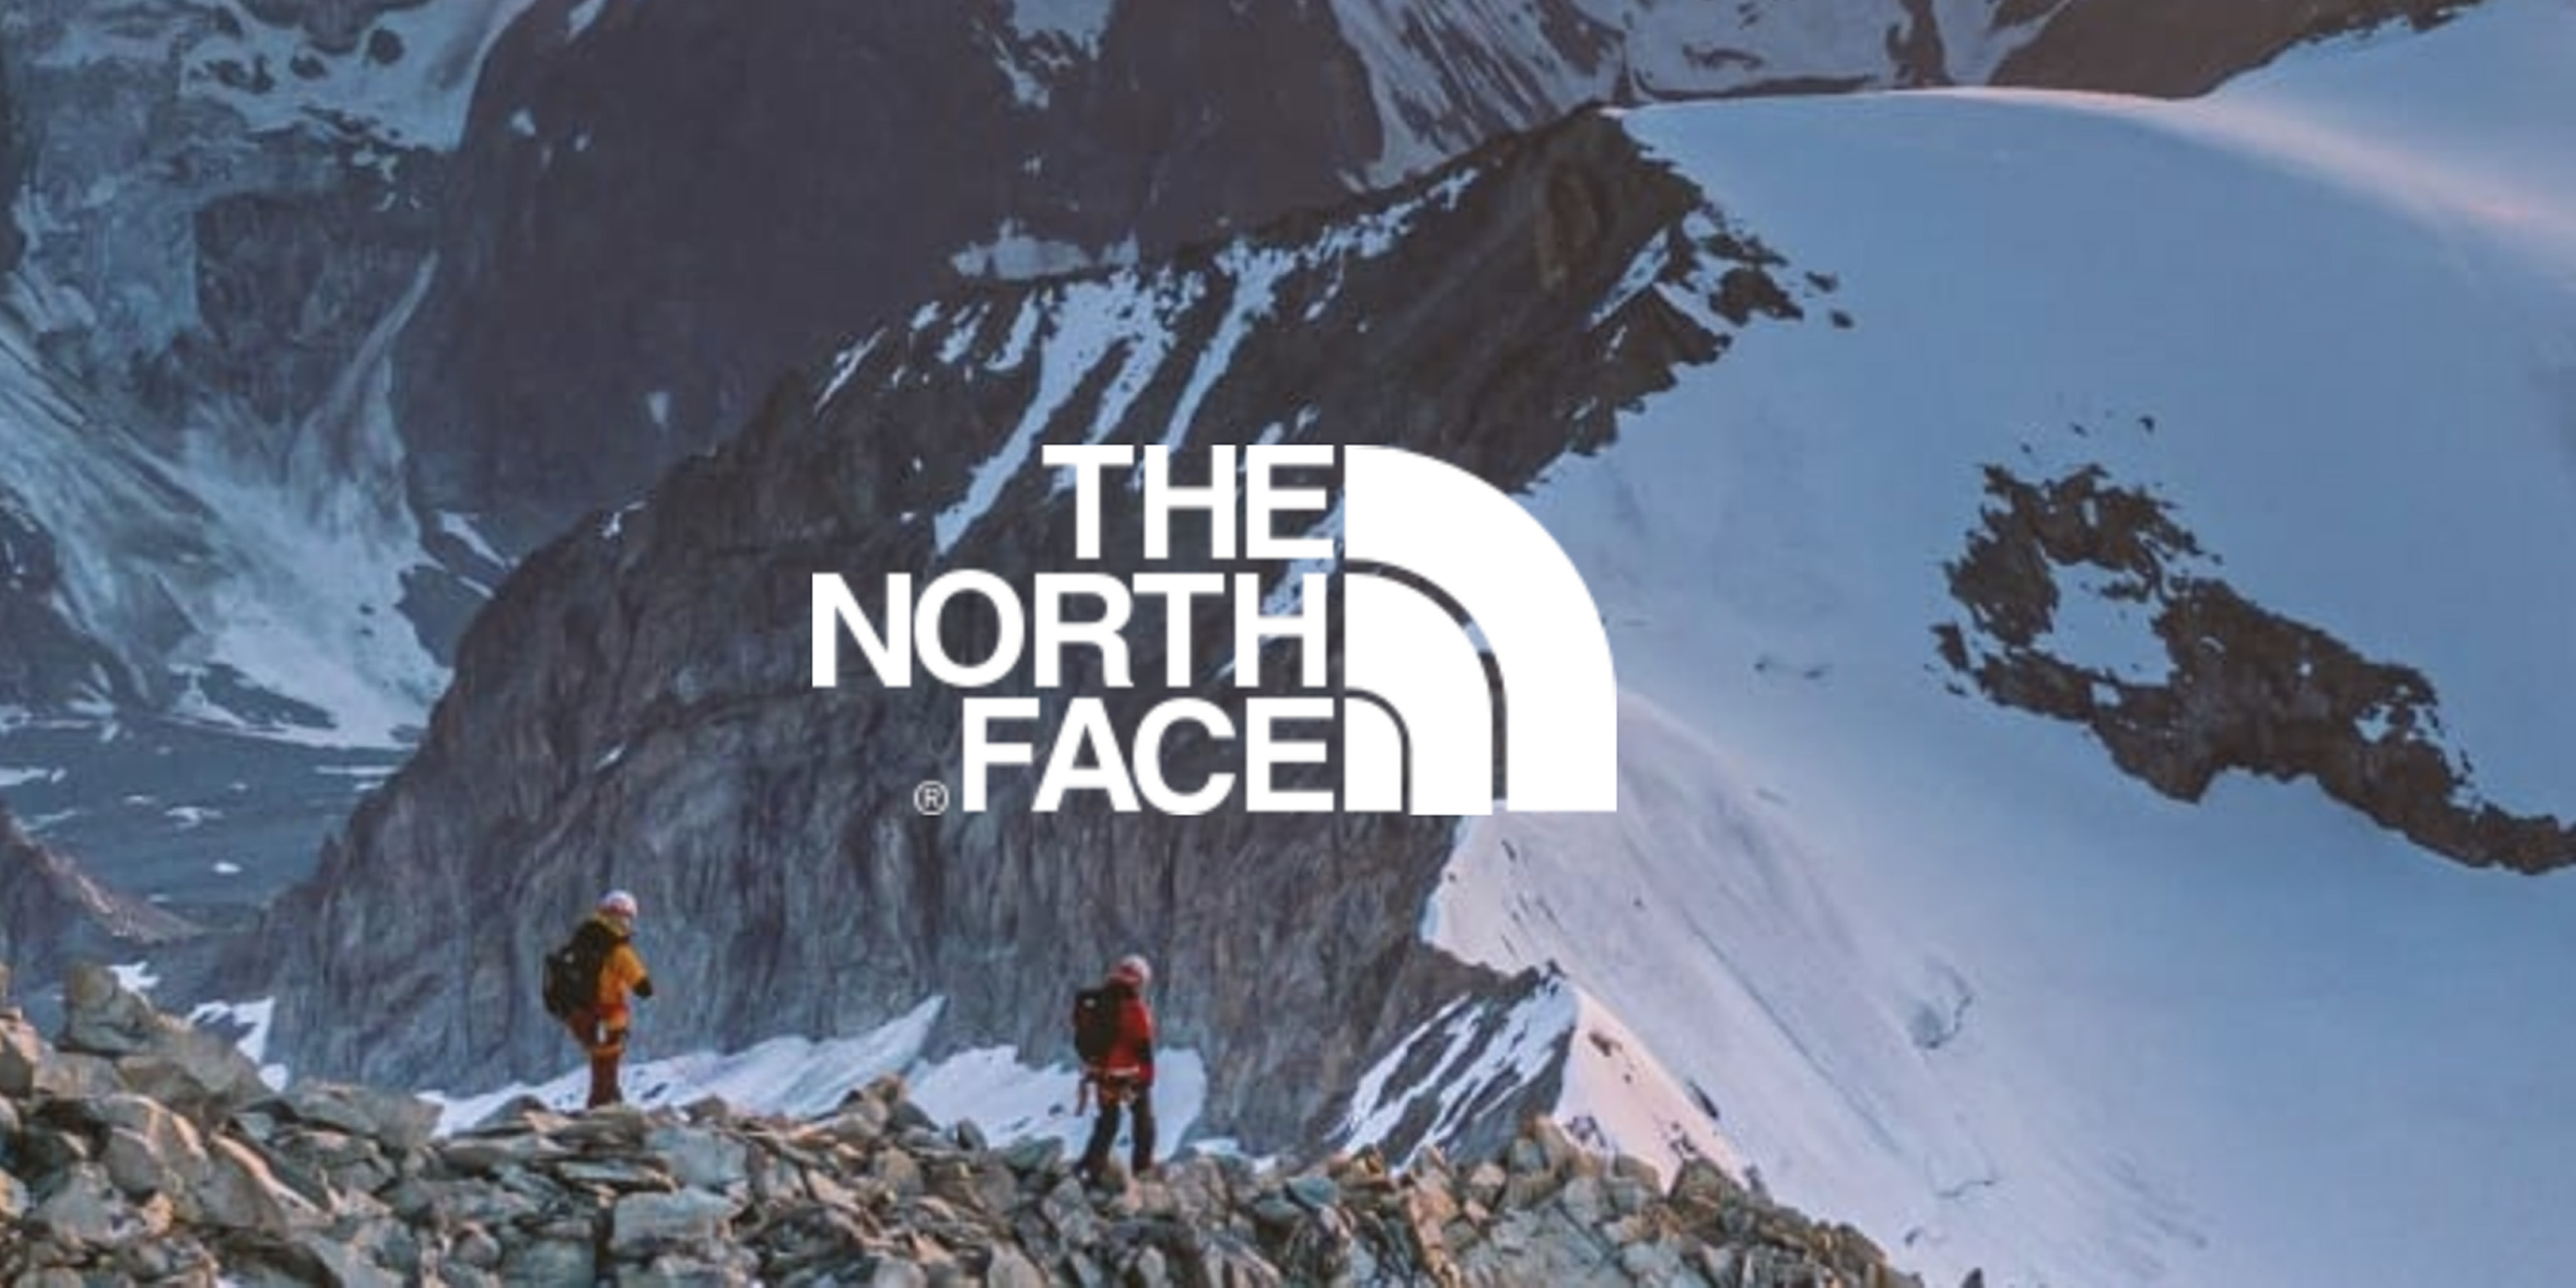 Download wallpapers The North Face logo red background The North Face 3d  logo 3d art The North Face brands logo red 3d The North Face logo for  desktop with resolution 2560x1600 High